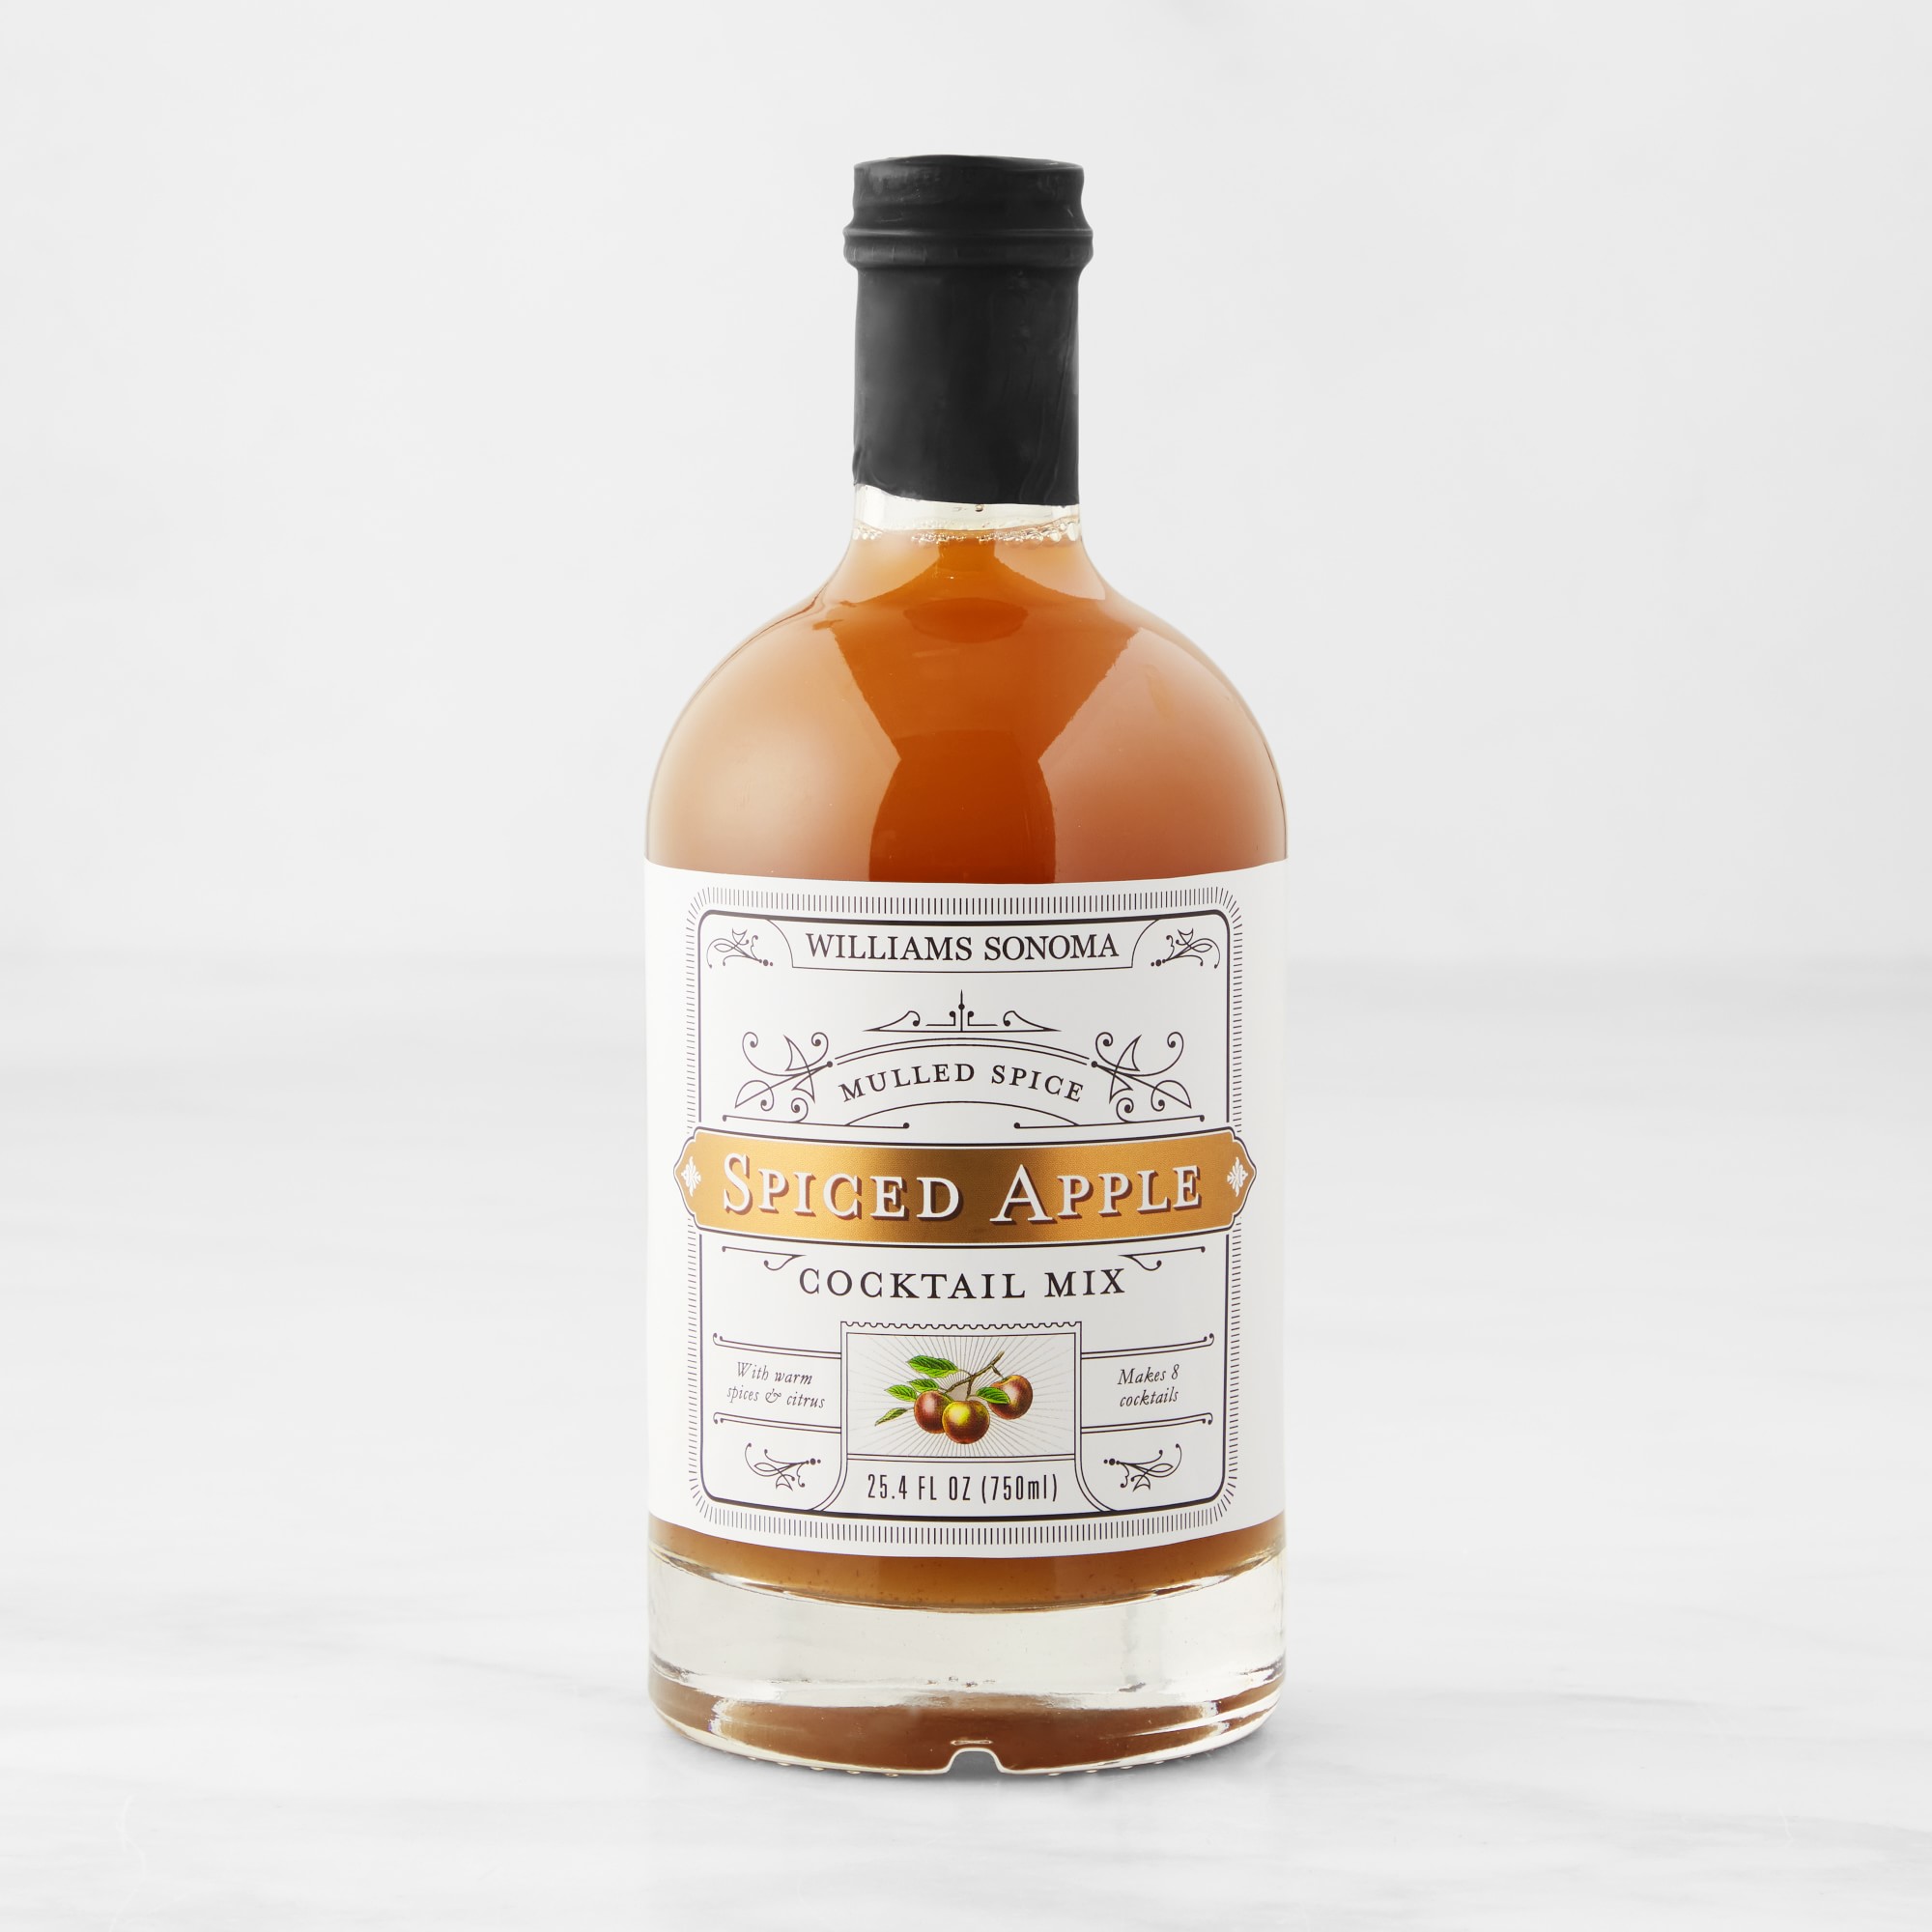 Williams Sonoma Spiced Apple Cocktail Mix